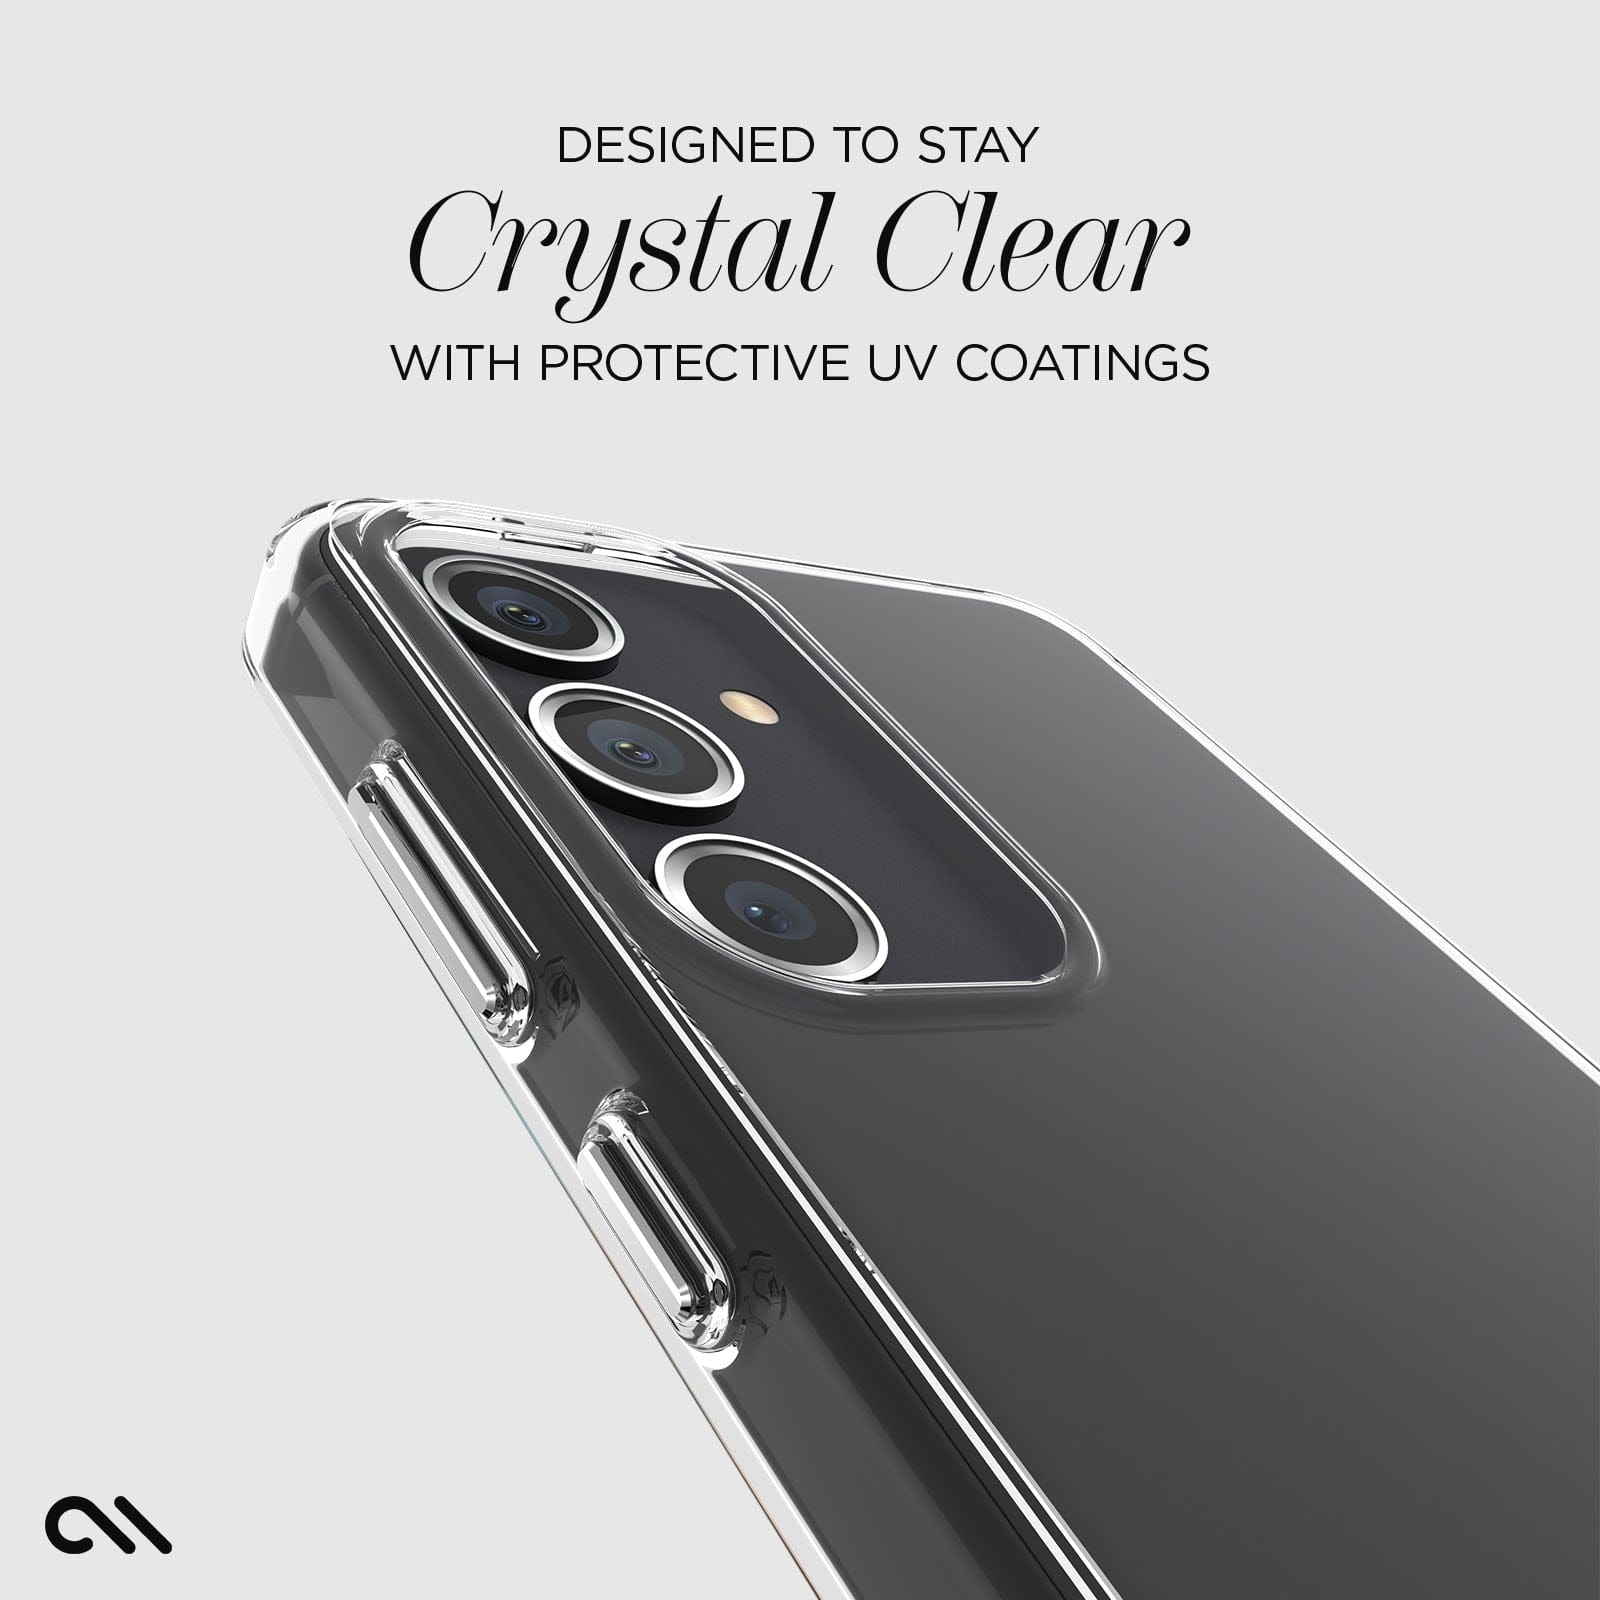 DESIGNED TO STAY CRYSTAL CLEAR WITH PROTECTIVE  UV COATINGS